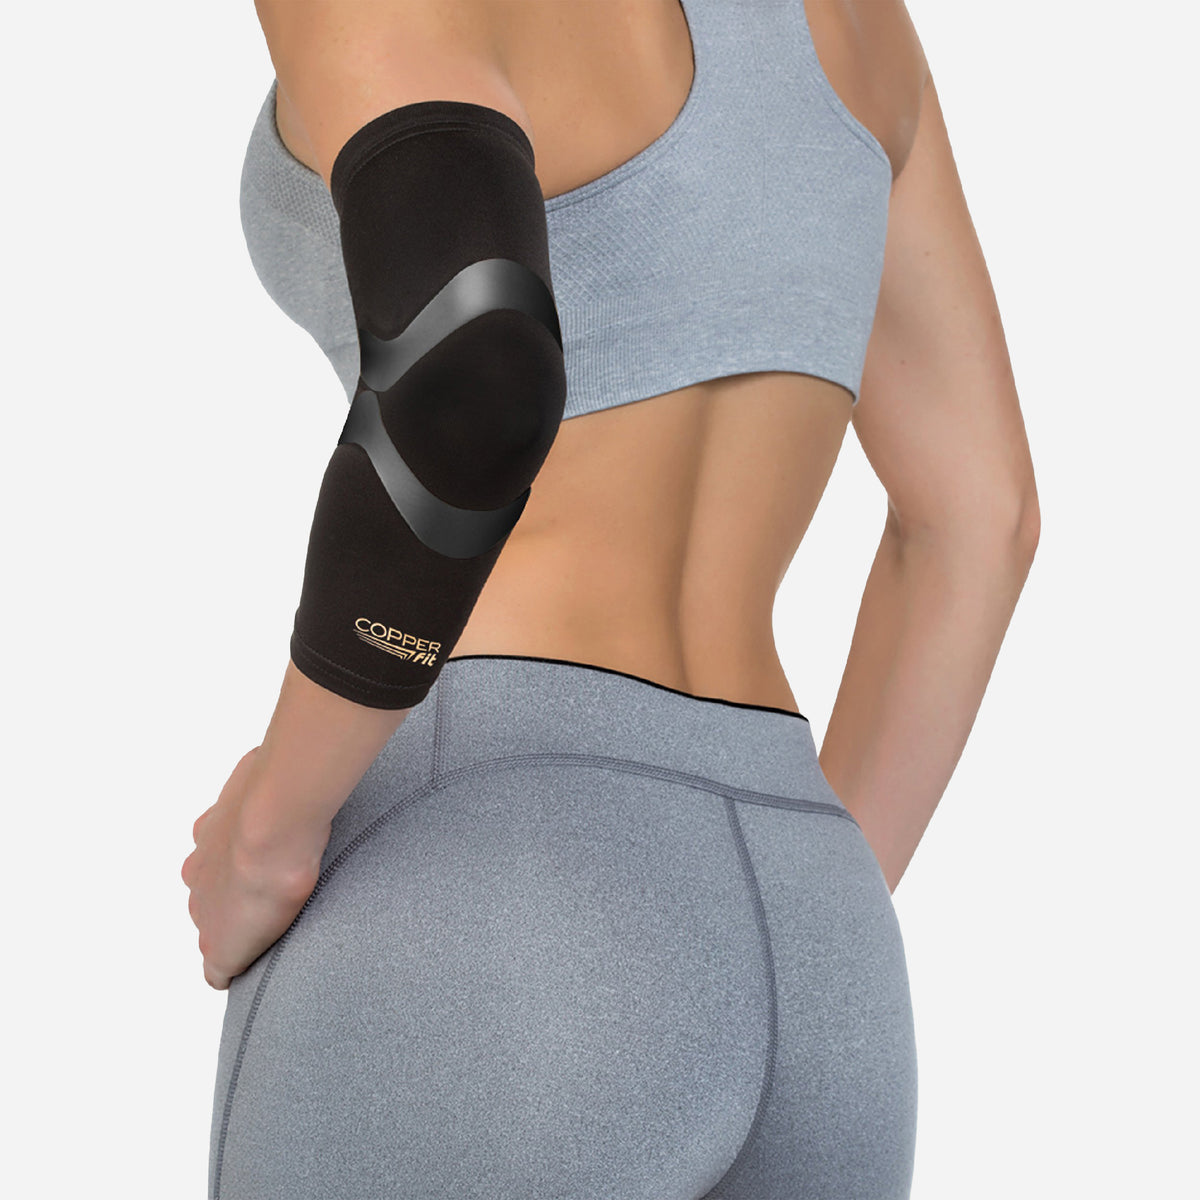 Copper Compression Elbow Brace and Tennis Elbow Sleeve for Women